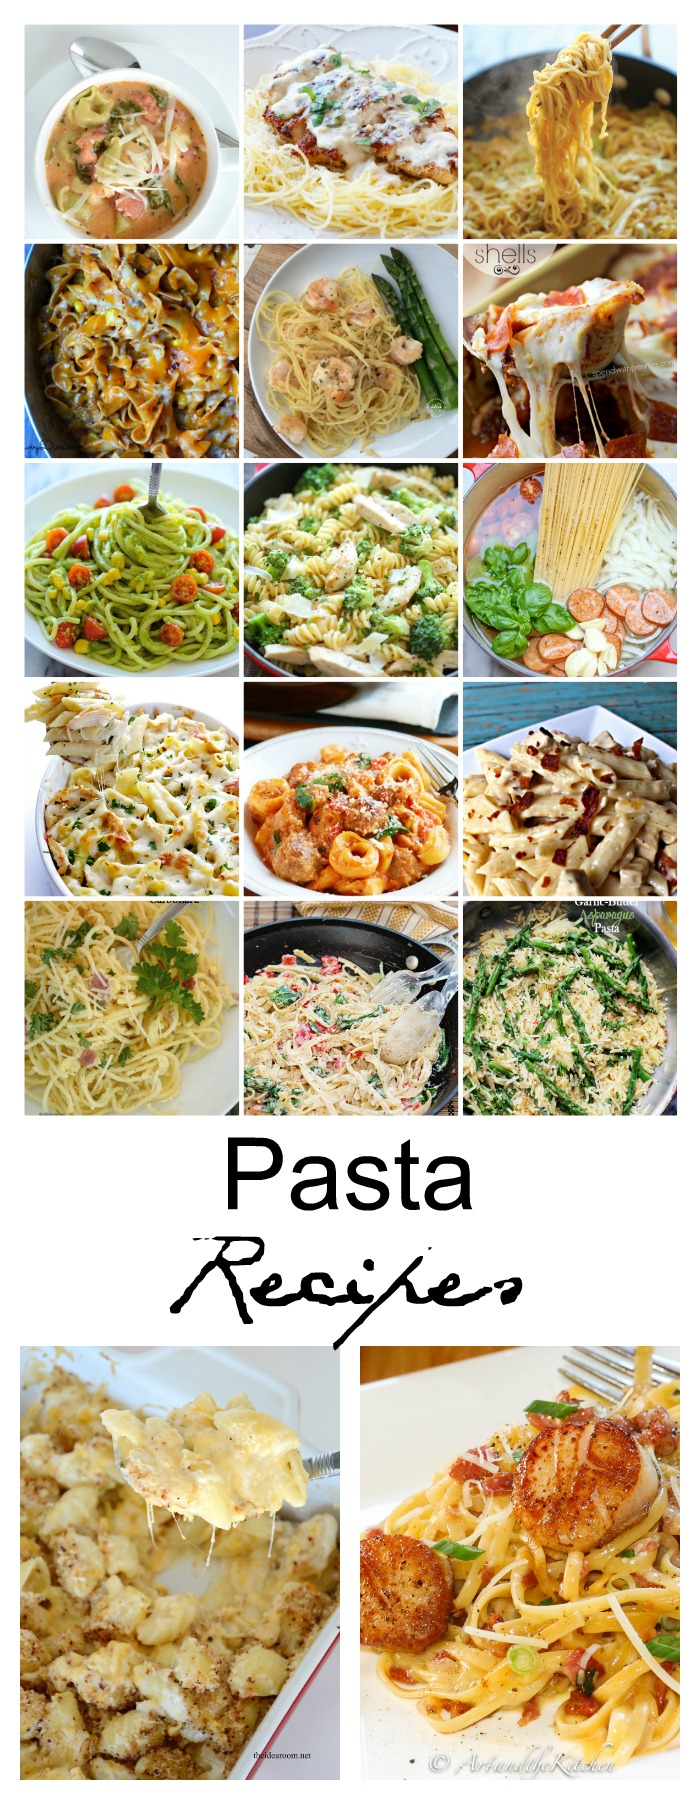 Recipes | Sharing some of the absolute best Pasta Recipes that you can make right at home. Perfect dinner ideas the whole family will love!